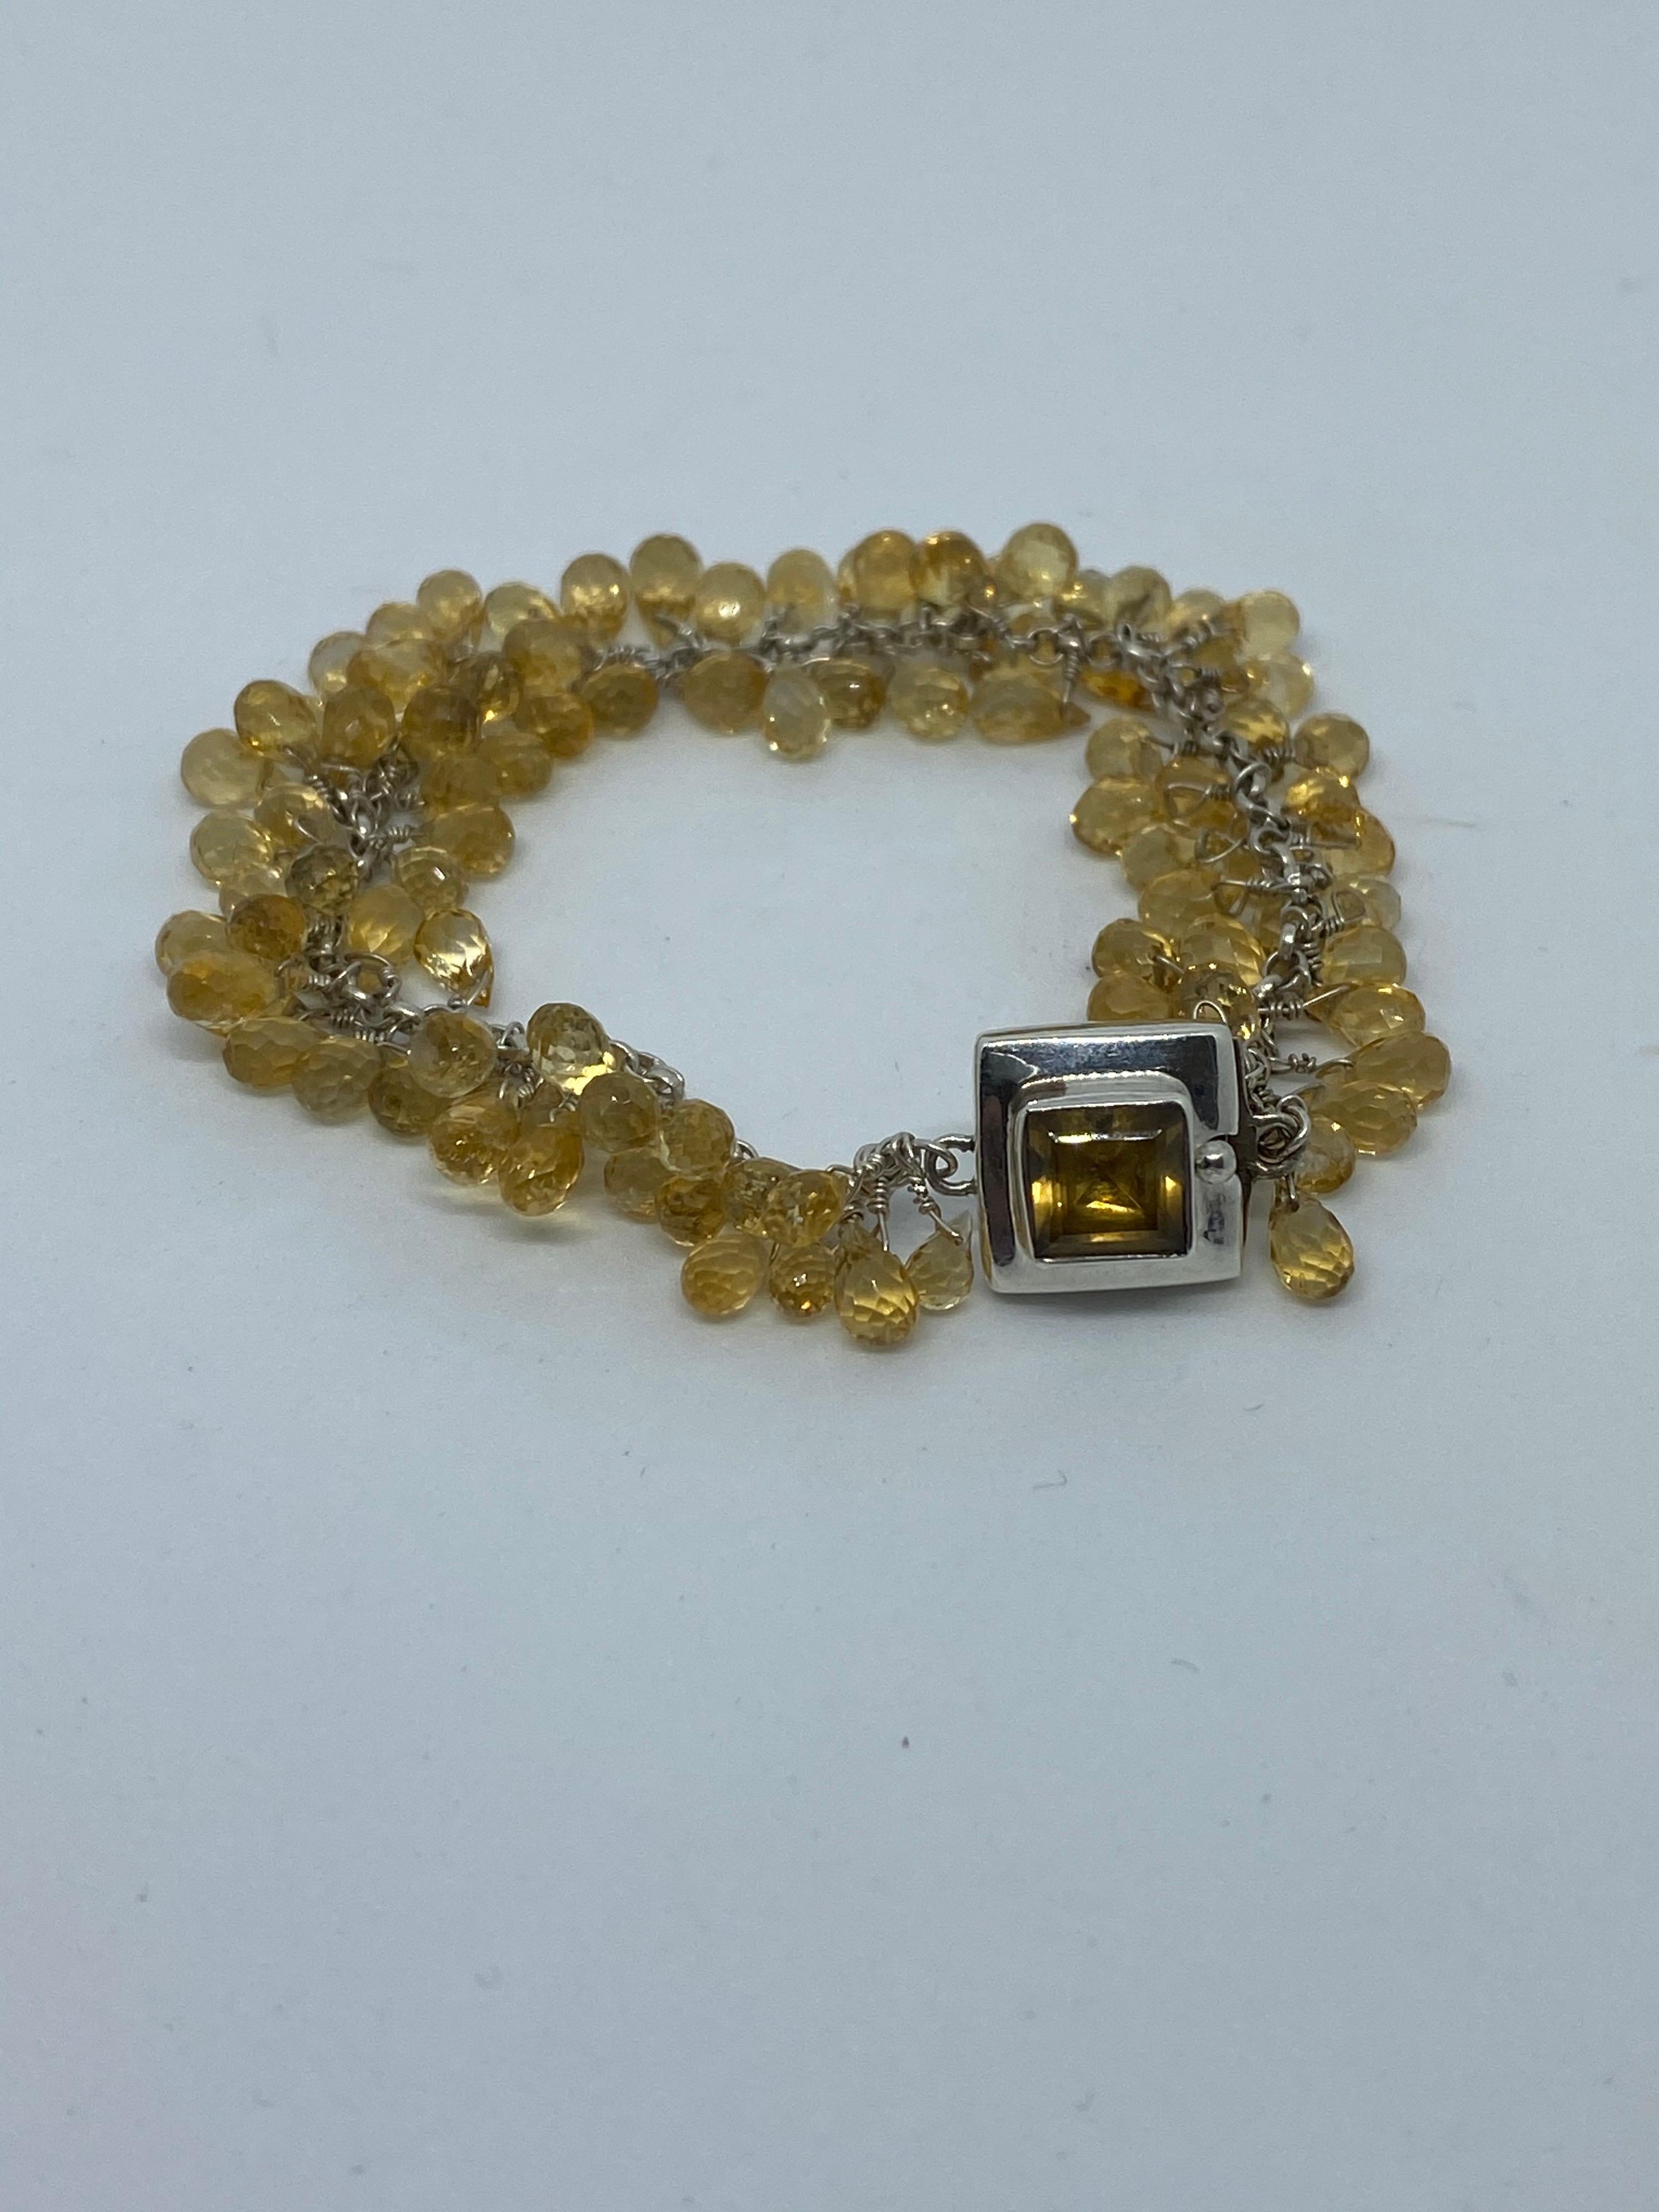 This bracelet features citrine briolettes that are hand wore wrapped in sterling Silver and dangle on the wrist. It shimmers and shines and makes a statement of elegance. All in yellow tones the clasp features a bezel-set Square 7mm Citrine.